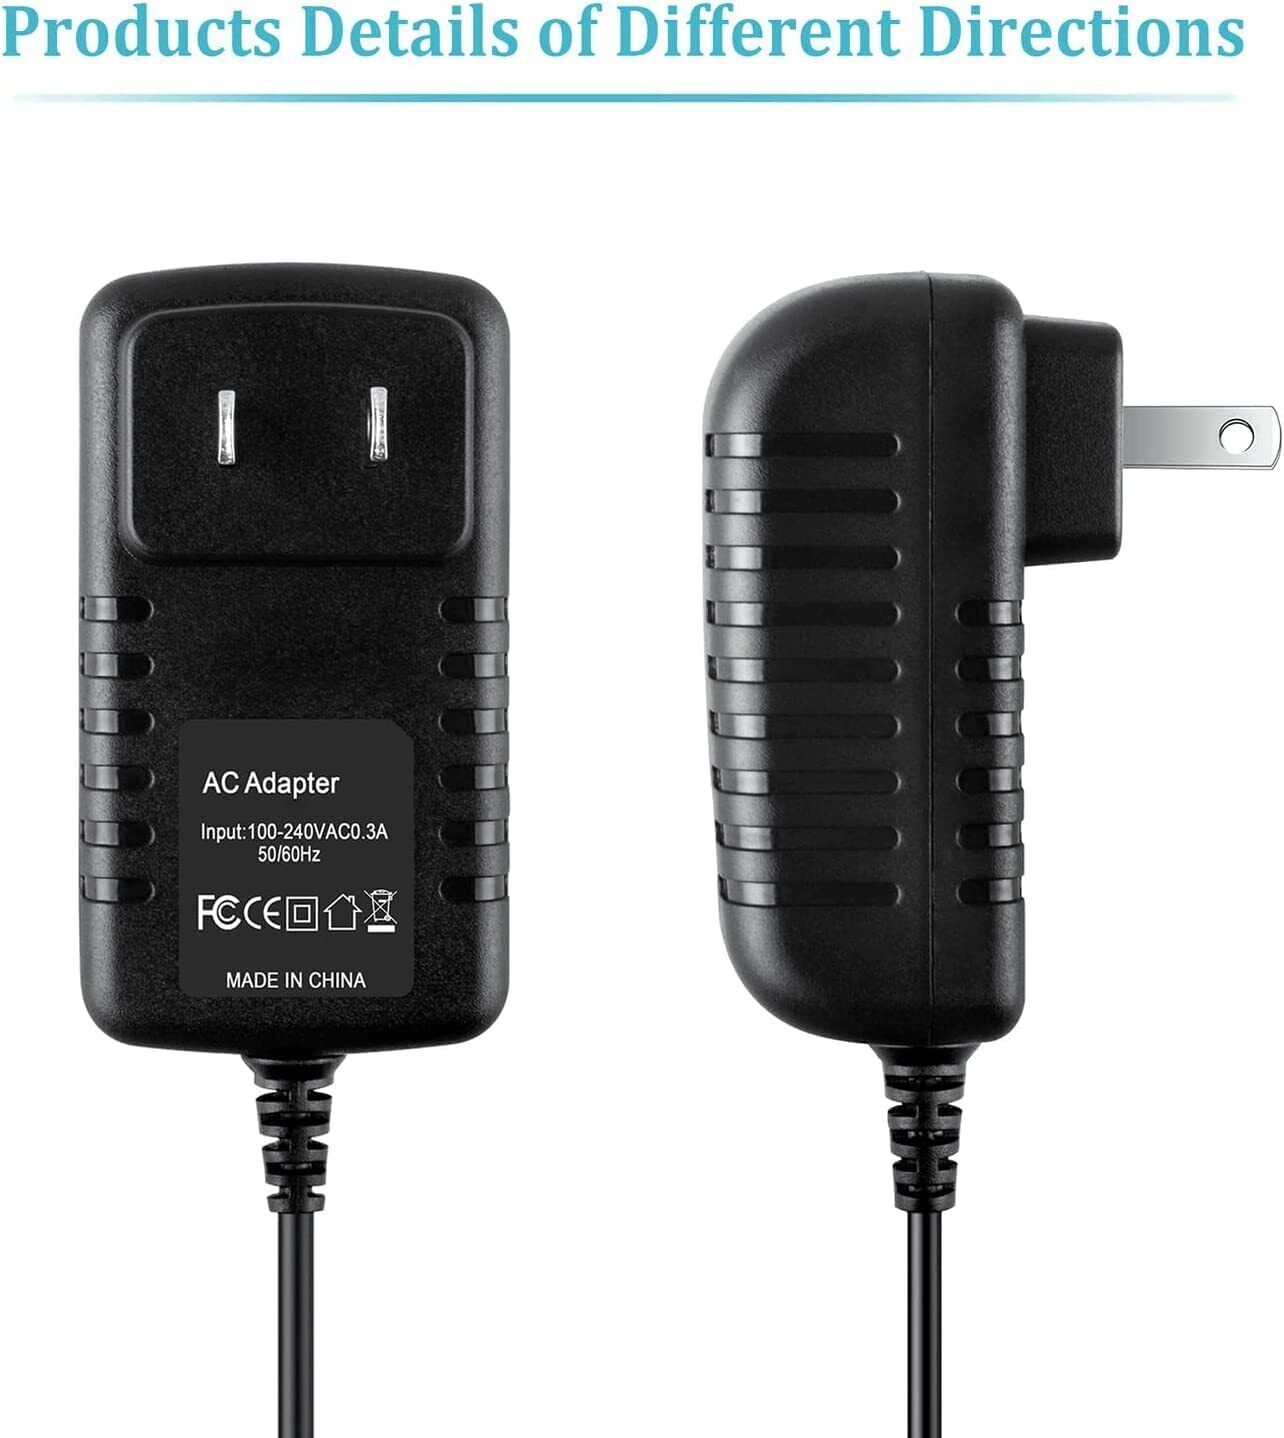 AC Adapter Charger For JBL Boombox Portable Wireless Speaker 20V 4A-4.5A Power Type AC/DC Adapter Features Portable Co